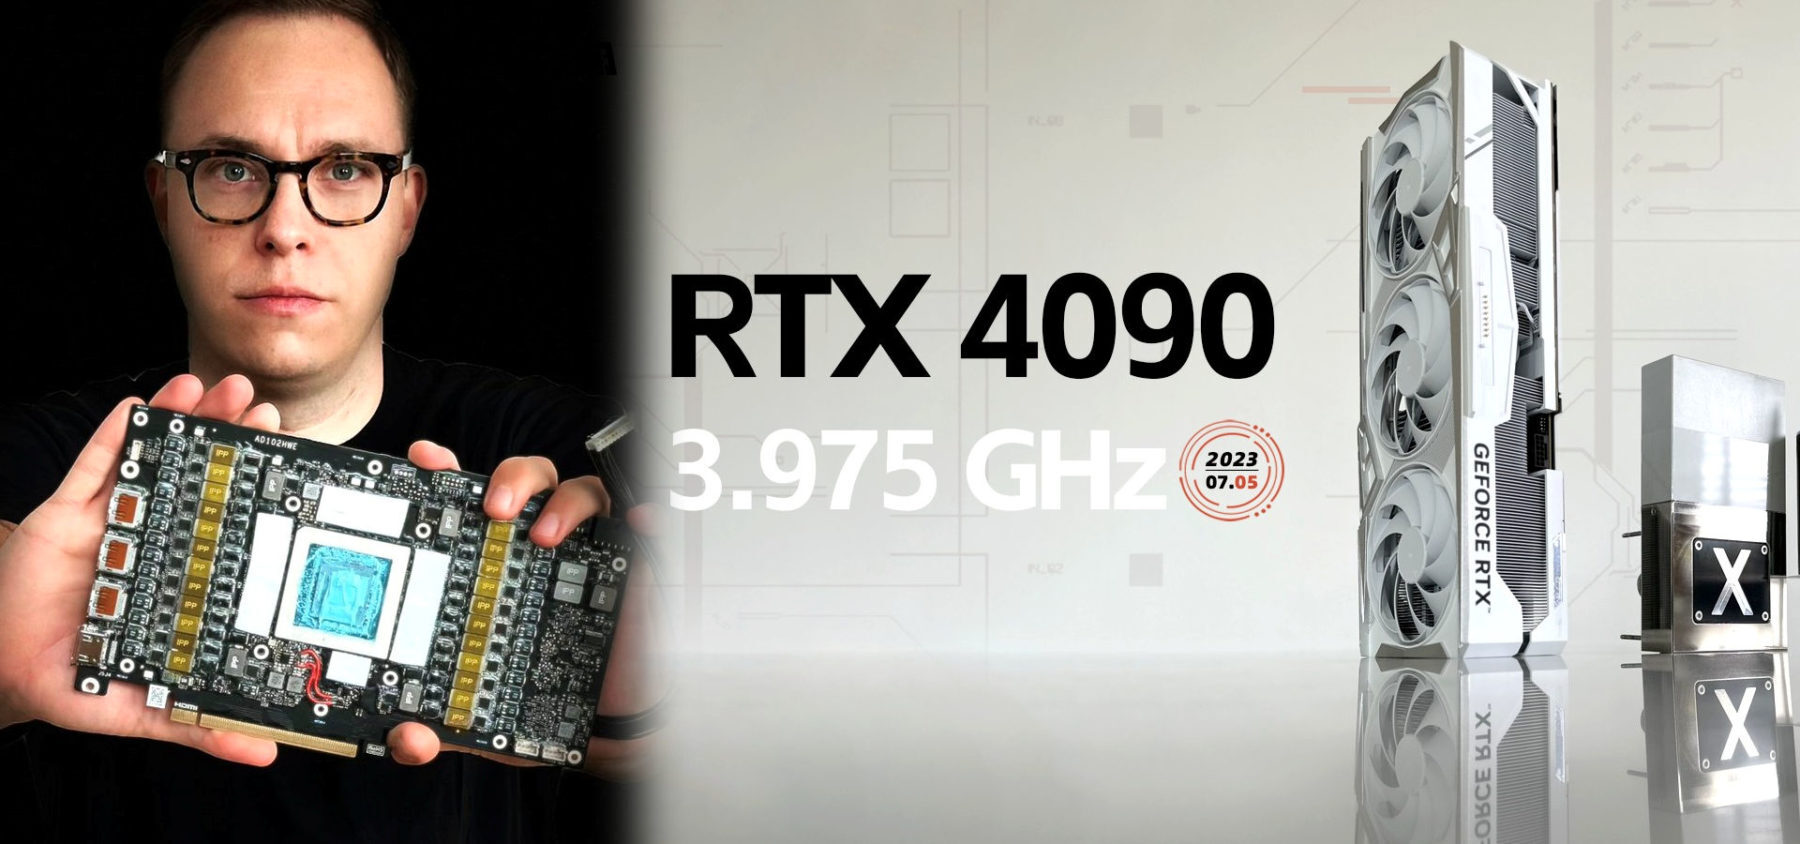 COLORFUL GeForce RTX 4090 iGame LAB GPU Claims World Record at 3.975GHz